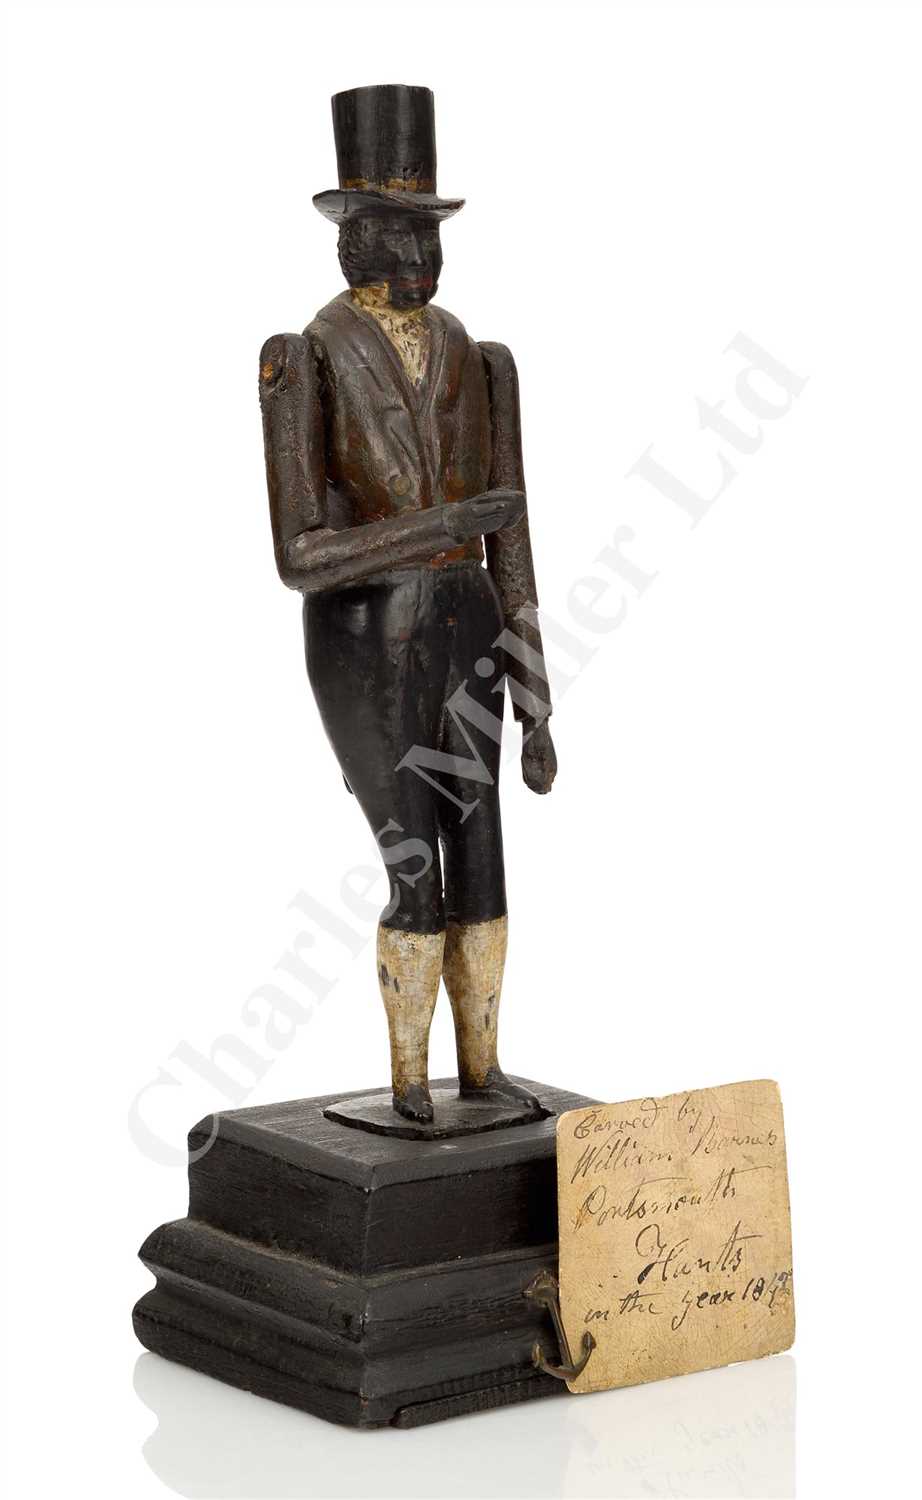 Lot 37 - AN UNUSUAL ARTICULATED FIGURINE CARVED FROM TIMBER RECOVERED FROM H.M.S. ROYAL GEORGE, CIRCA 1842